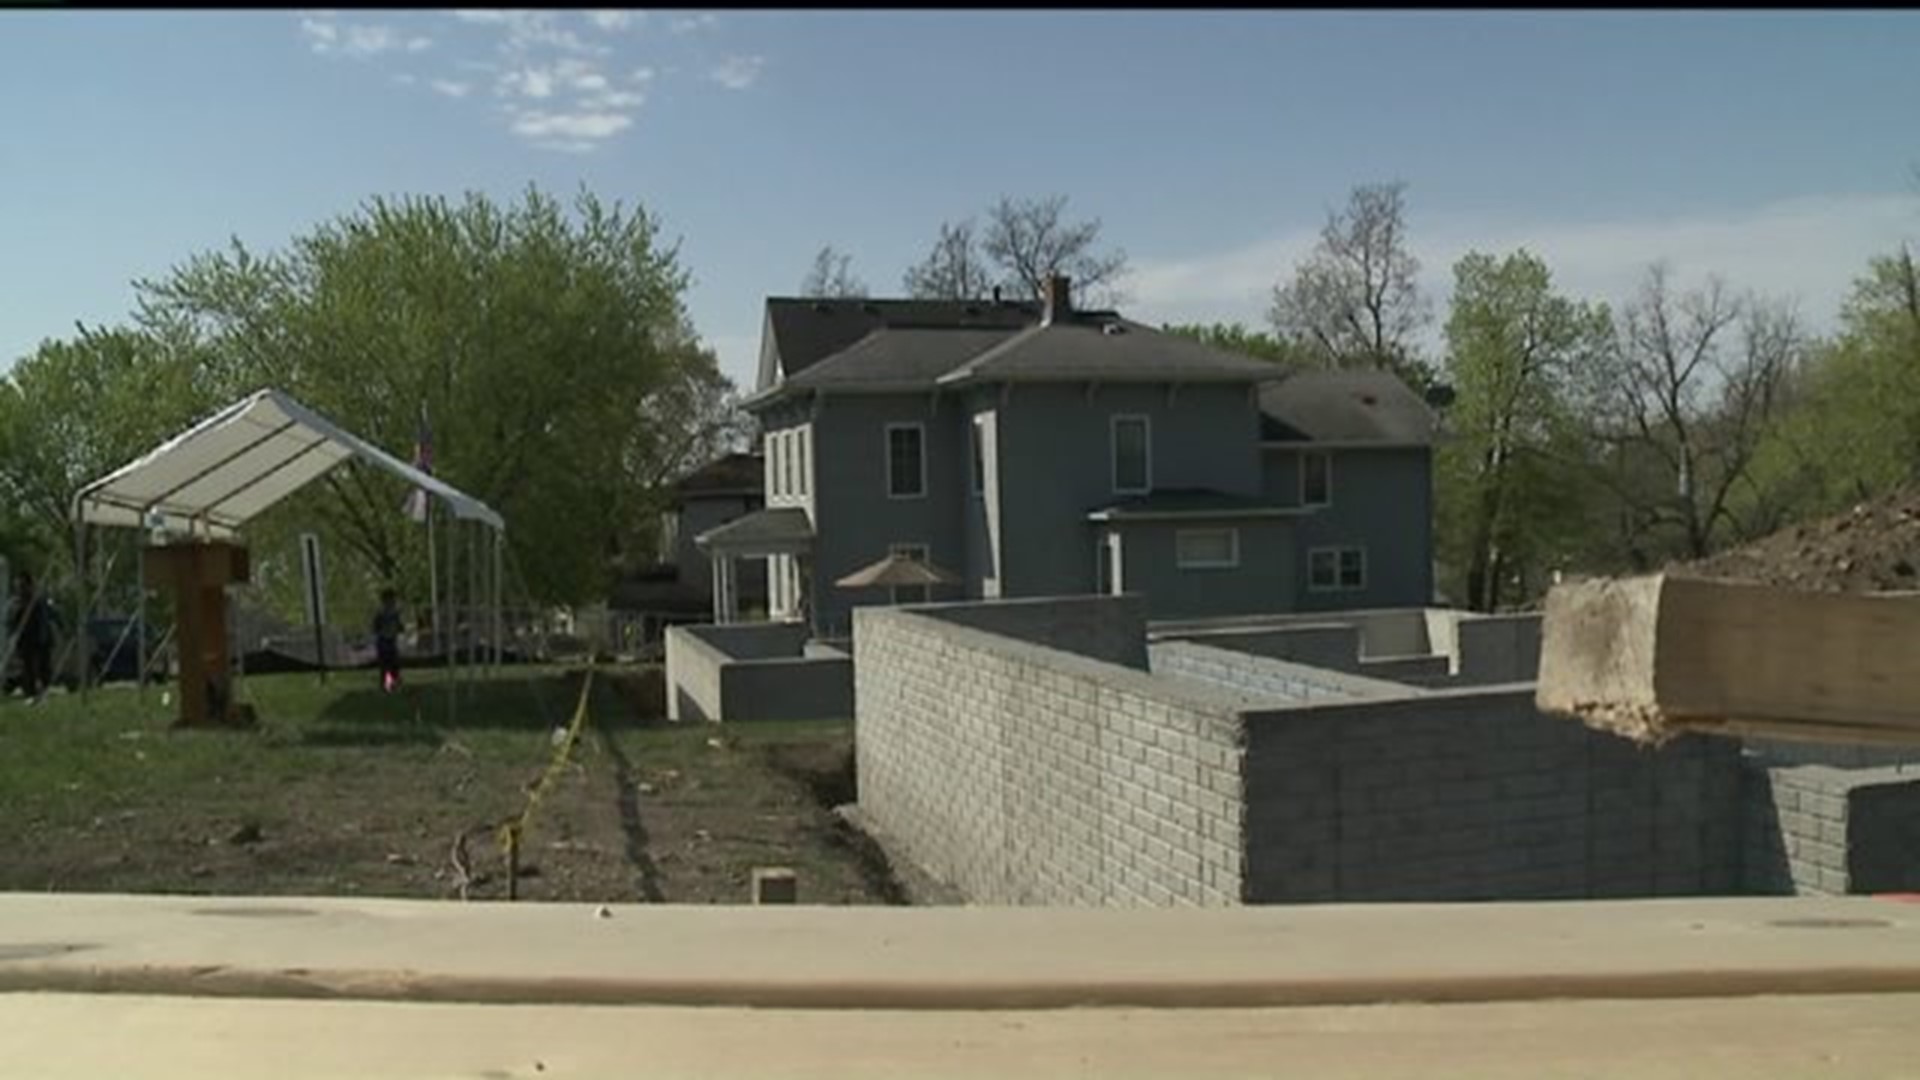 Habitat for Humanity breaks ground on two new homes